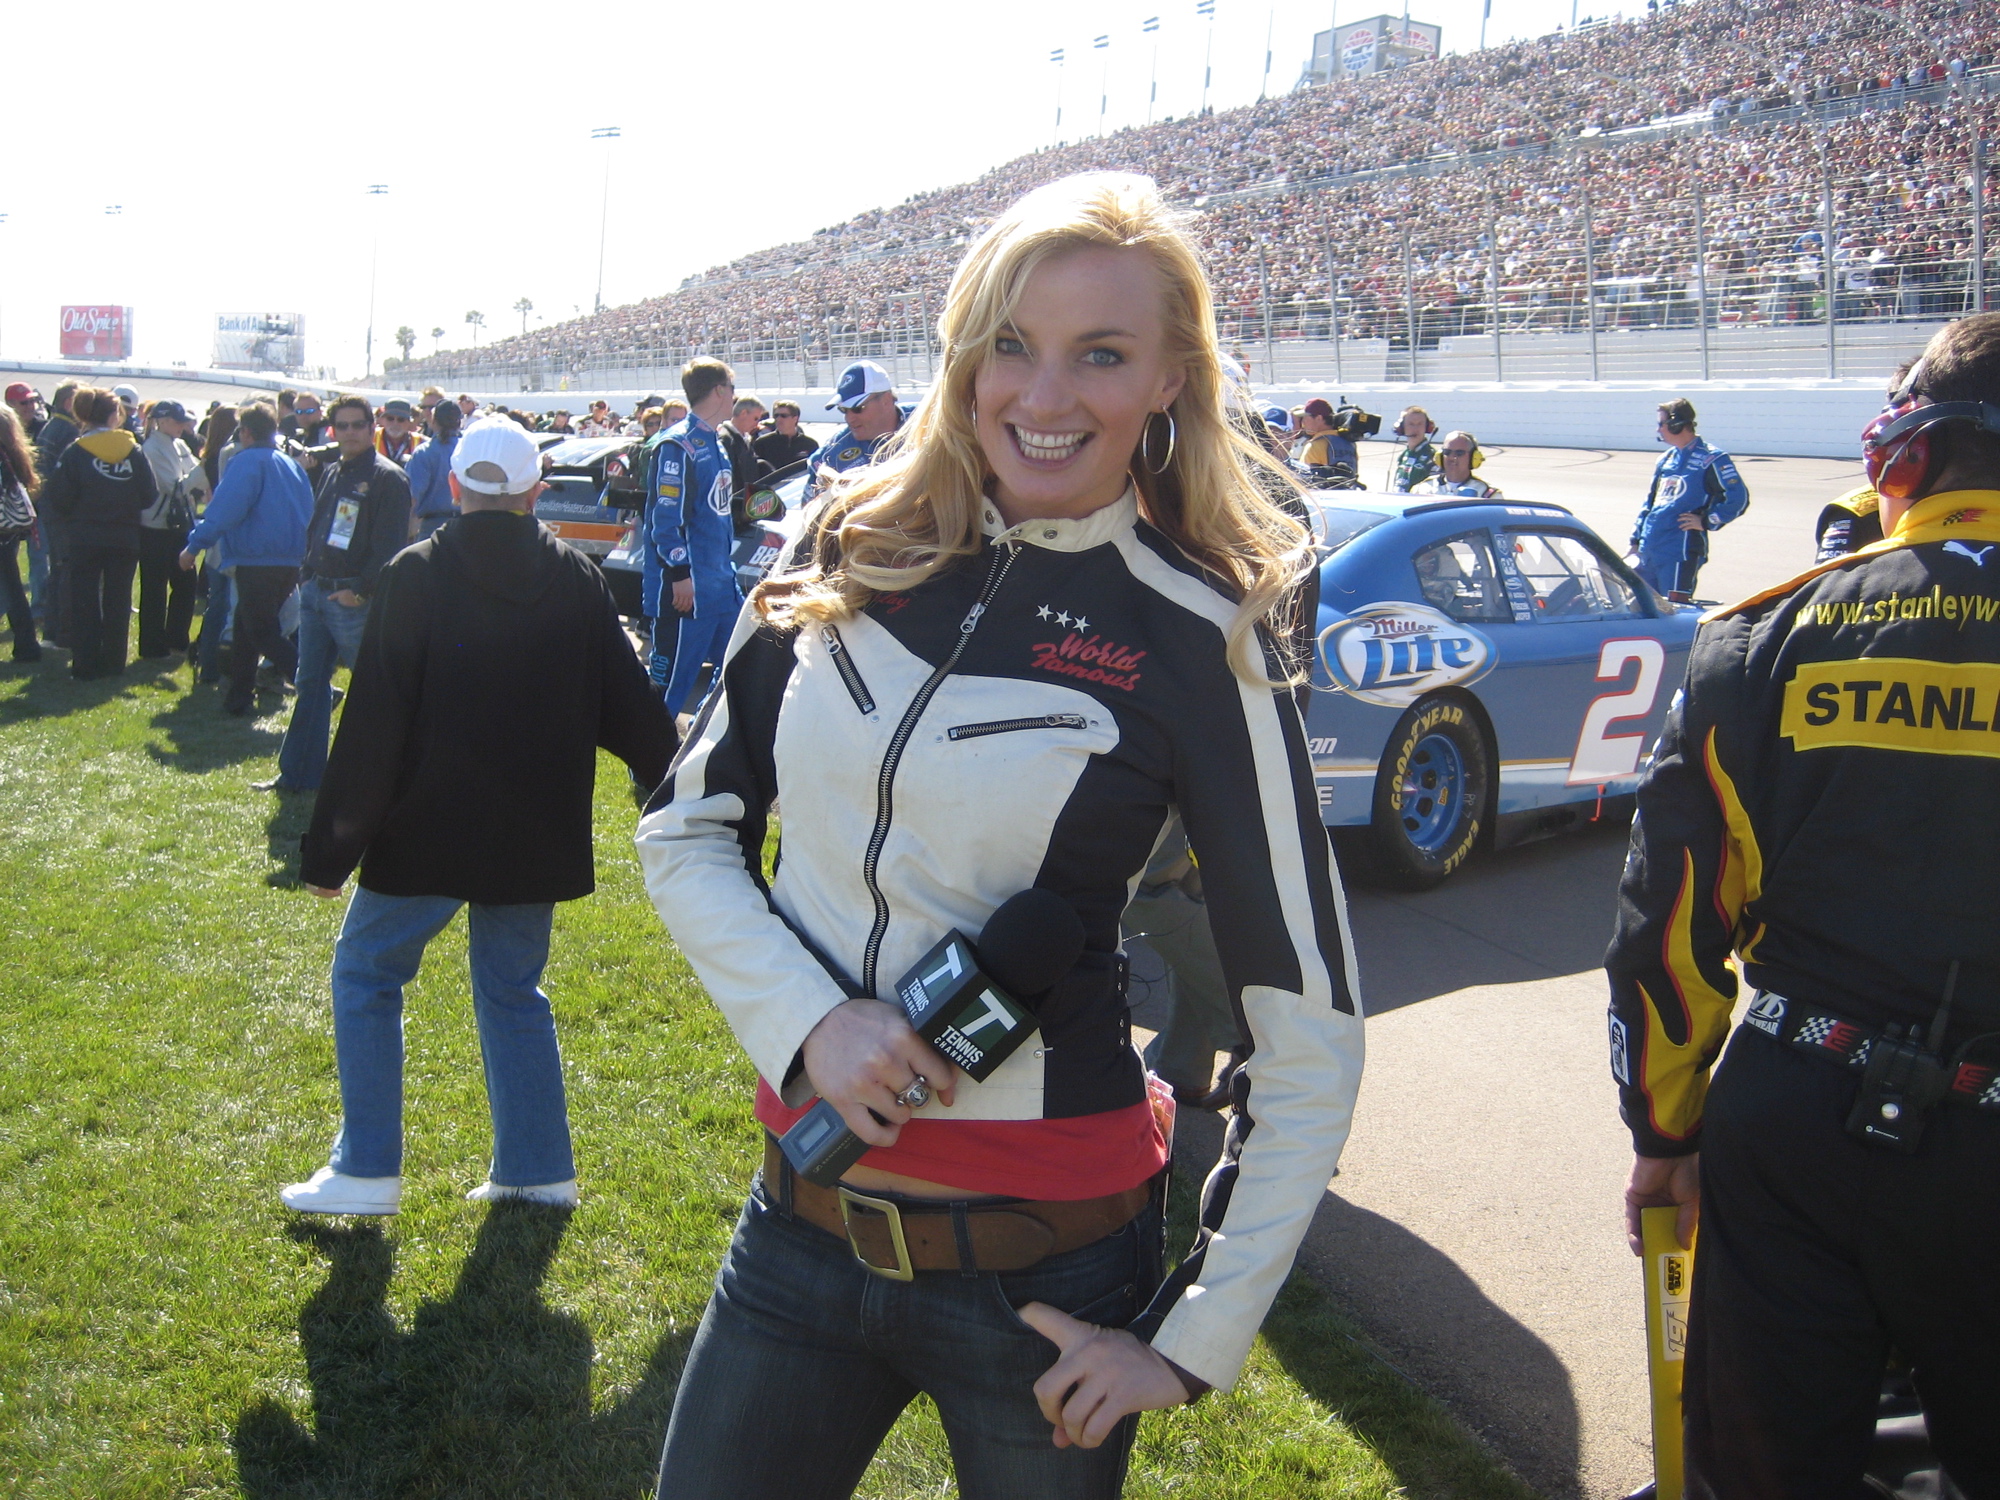 OFF THE STRIP WITH MIEKE BUCHAN. Mieke reporting from center-field, pre-race. Las Vegas Nascar. 2008